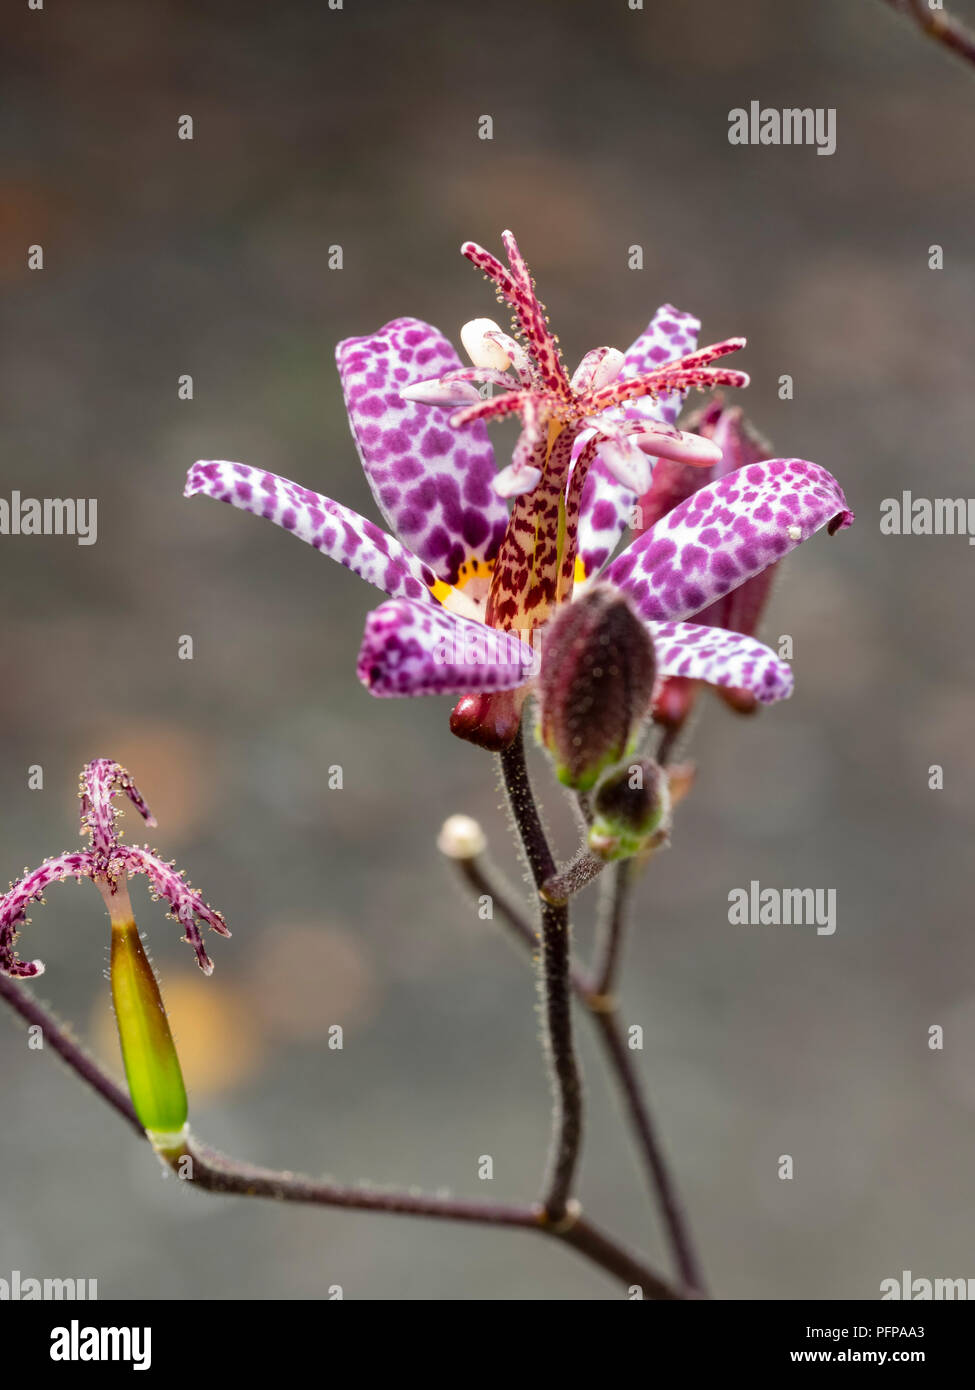 Curious, spotted, late summer flower of the perennial toad lily, Tricyrtis formosana 'Kestrel' Stock Photo